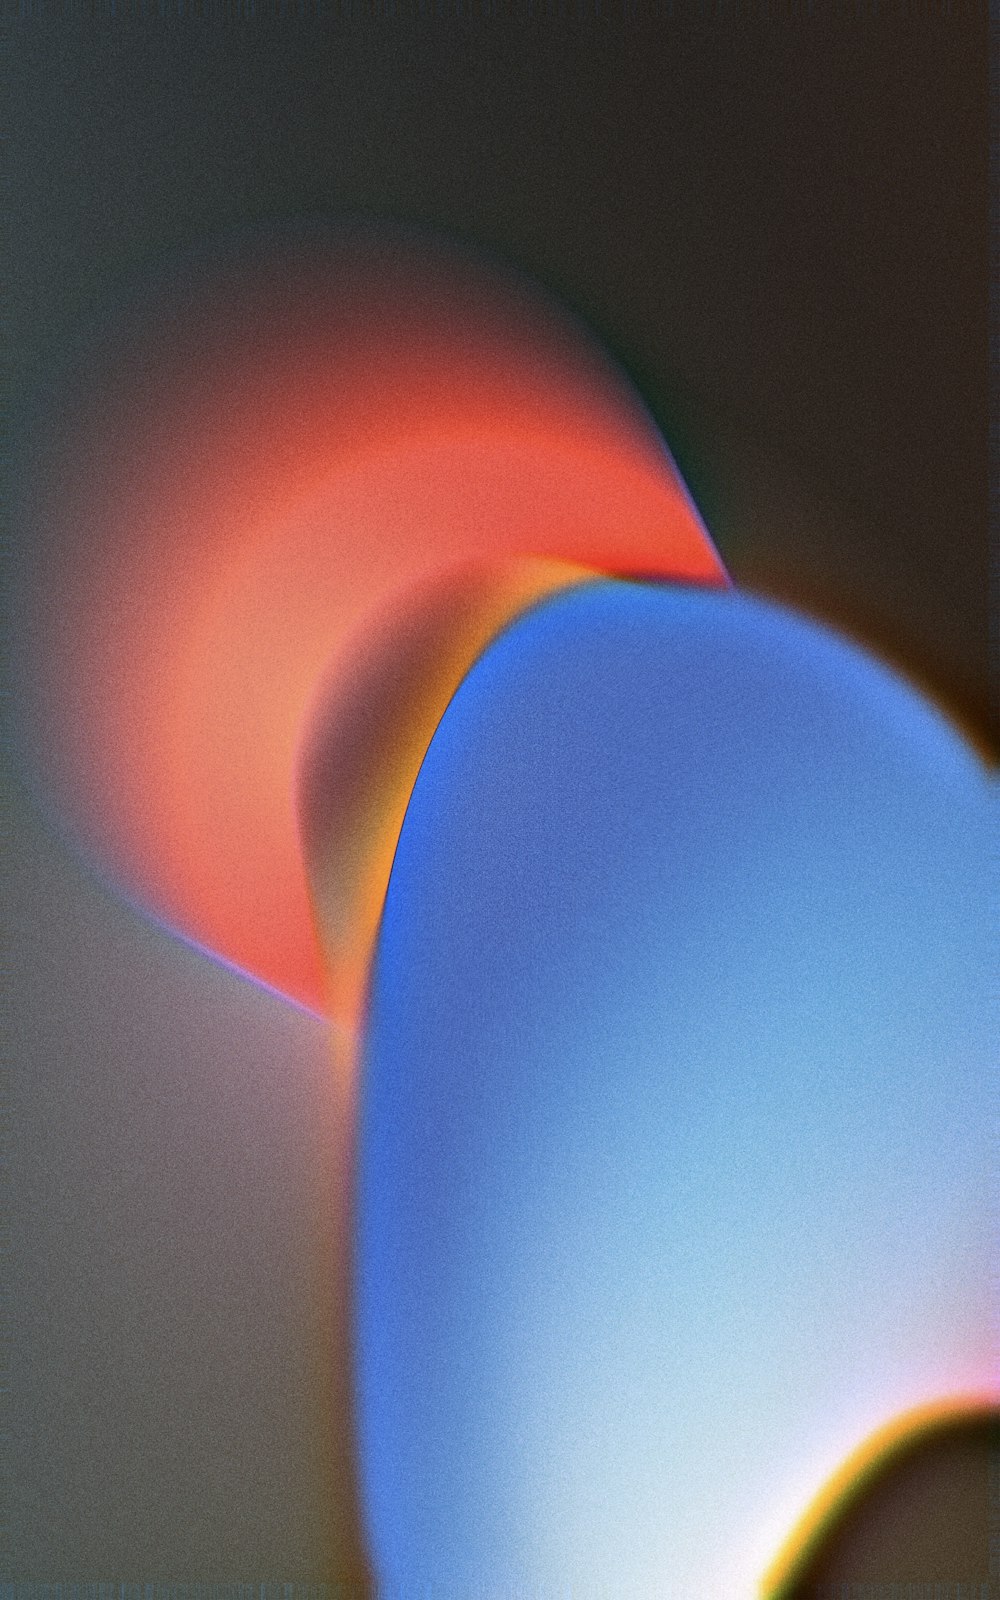 a close-up of a blue and orange circle